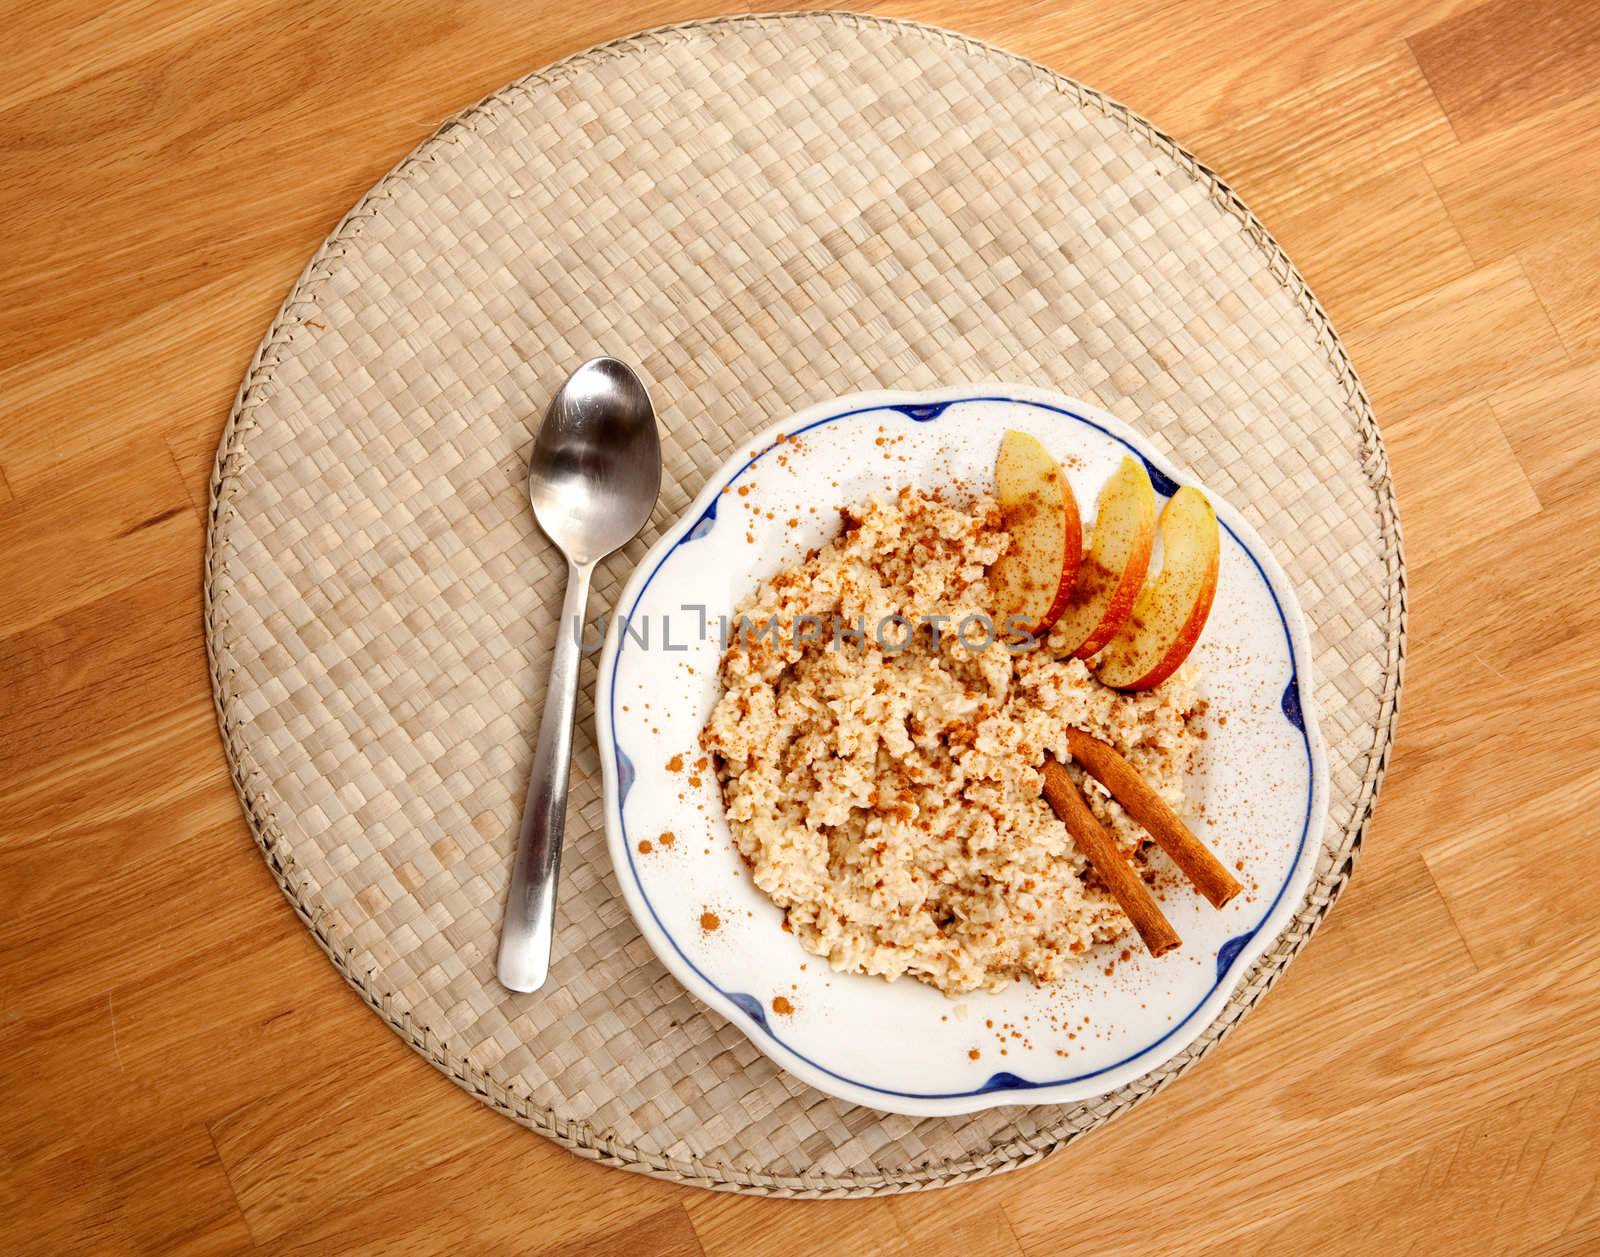 A bowl of porridge with apple and cinnamon spices viewed from above